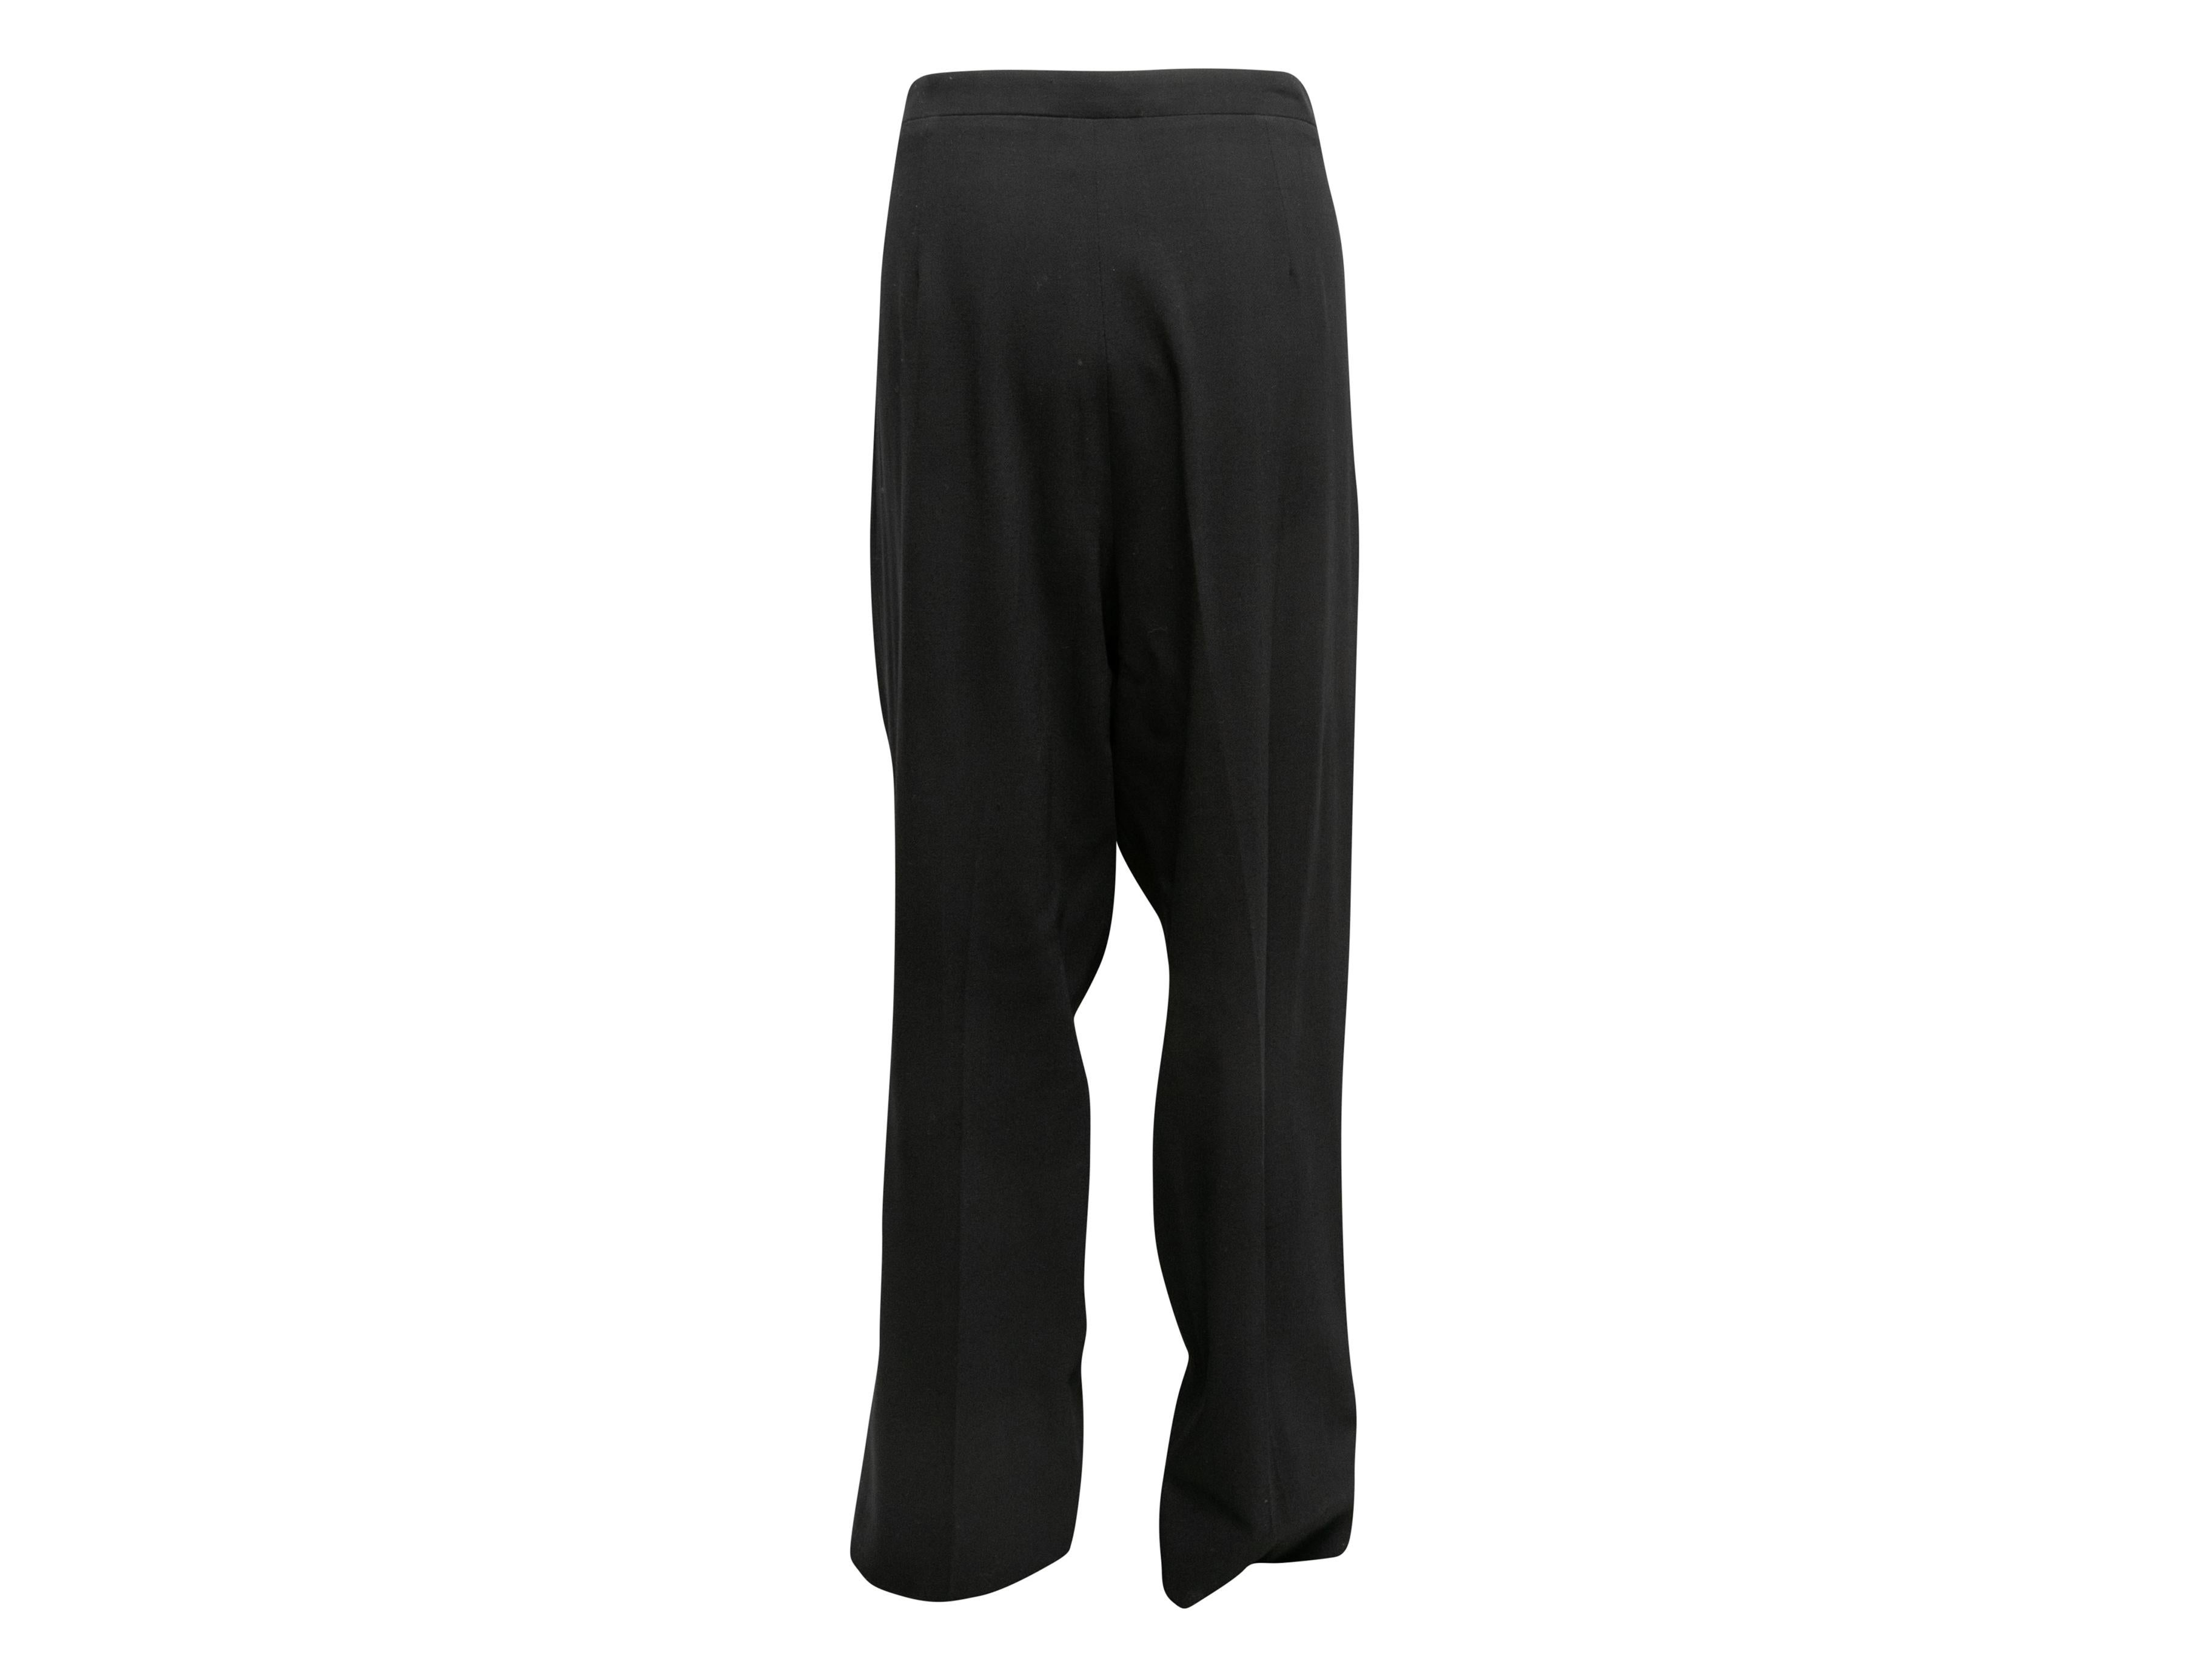 Black Chanel Fall/Winter 2008 Wool Trousers Size FR 50 In Good Condition For Sale In New York, NY